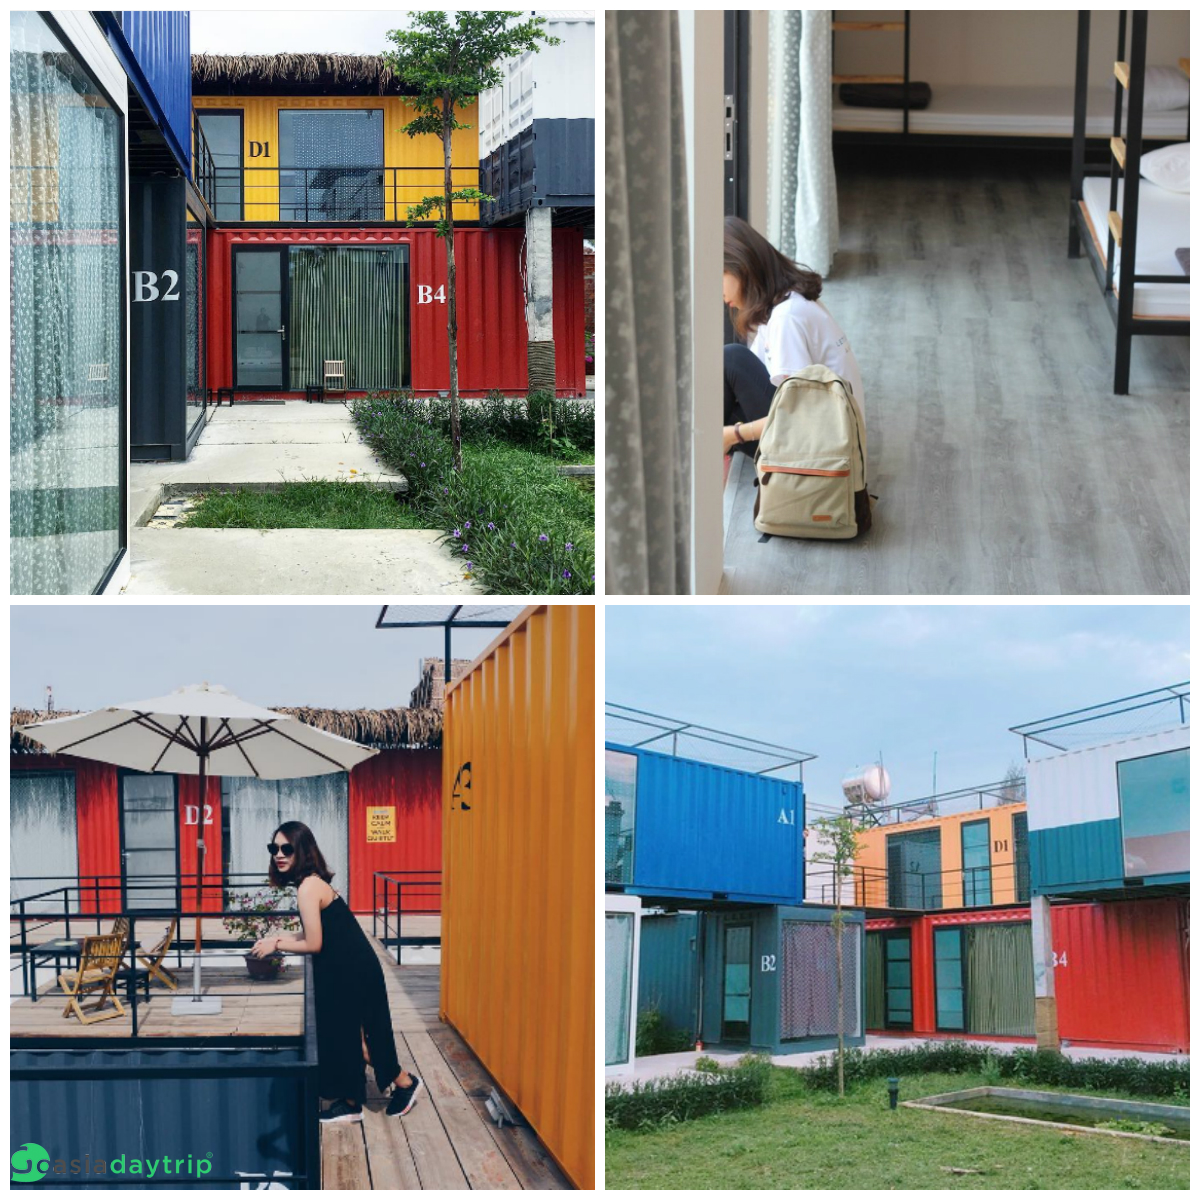 With colorful containers, Packo Hostel is an attractive choice for many travelers visiting Da Nang.